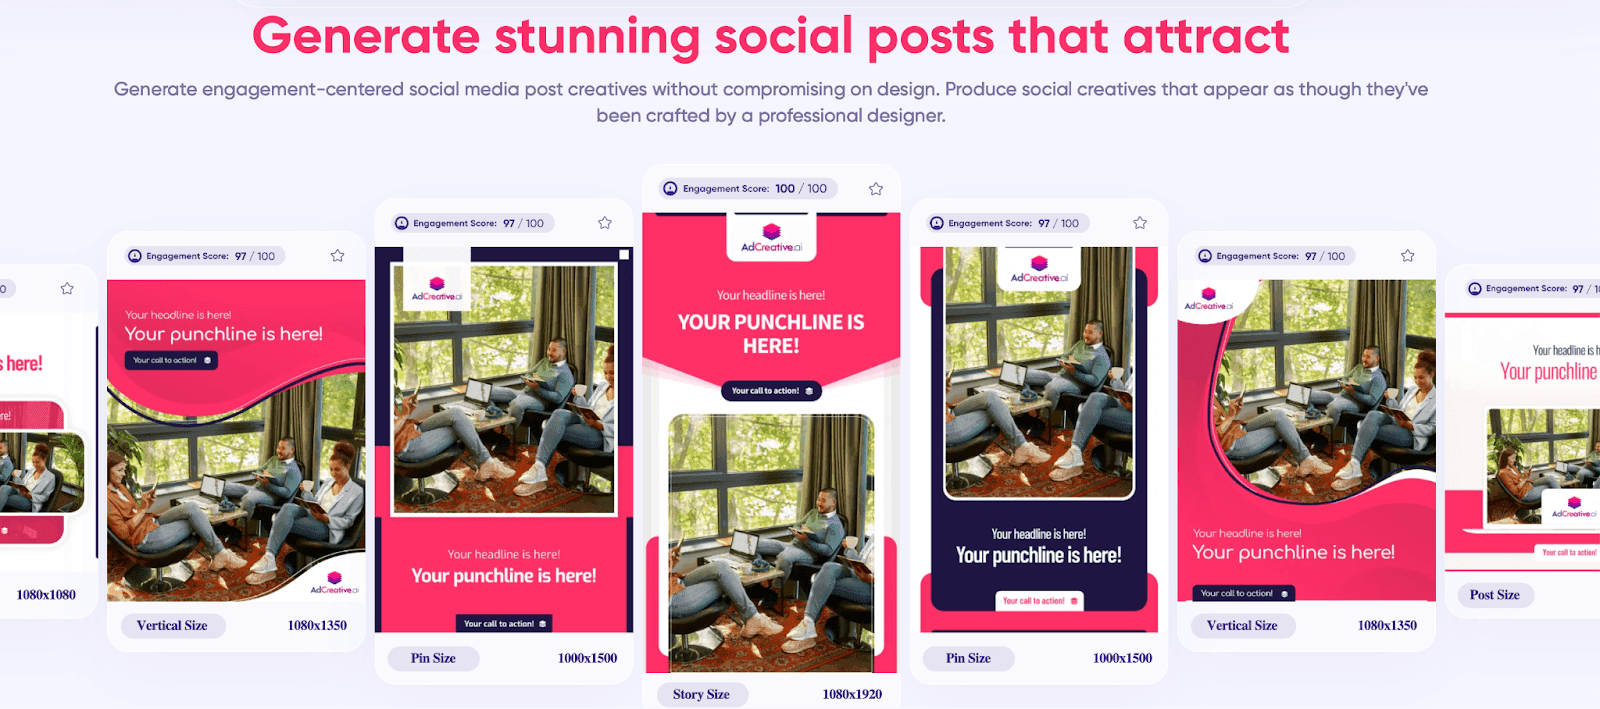 Generate stunning social posts that attract